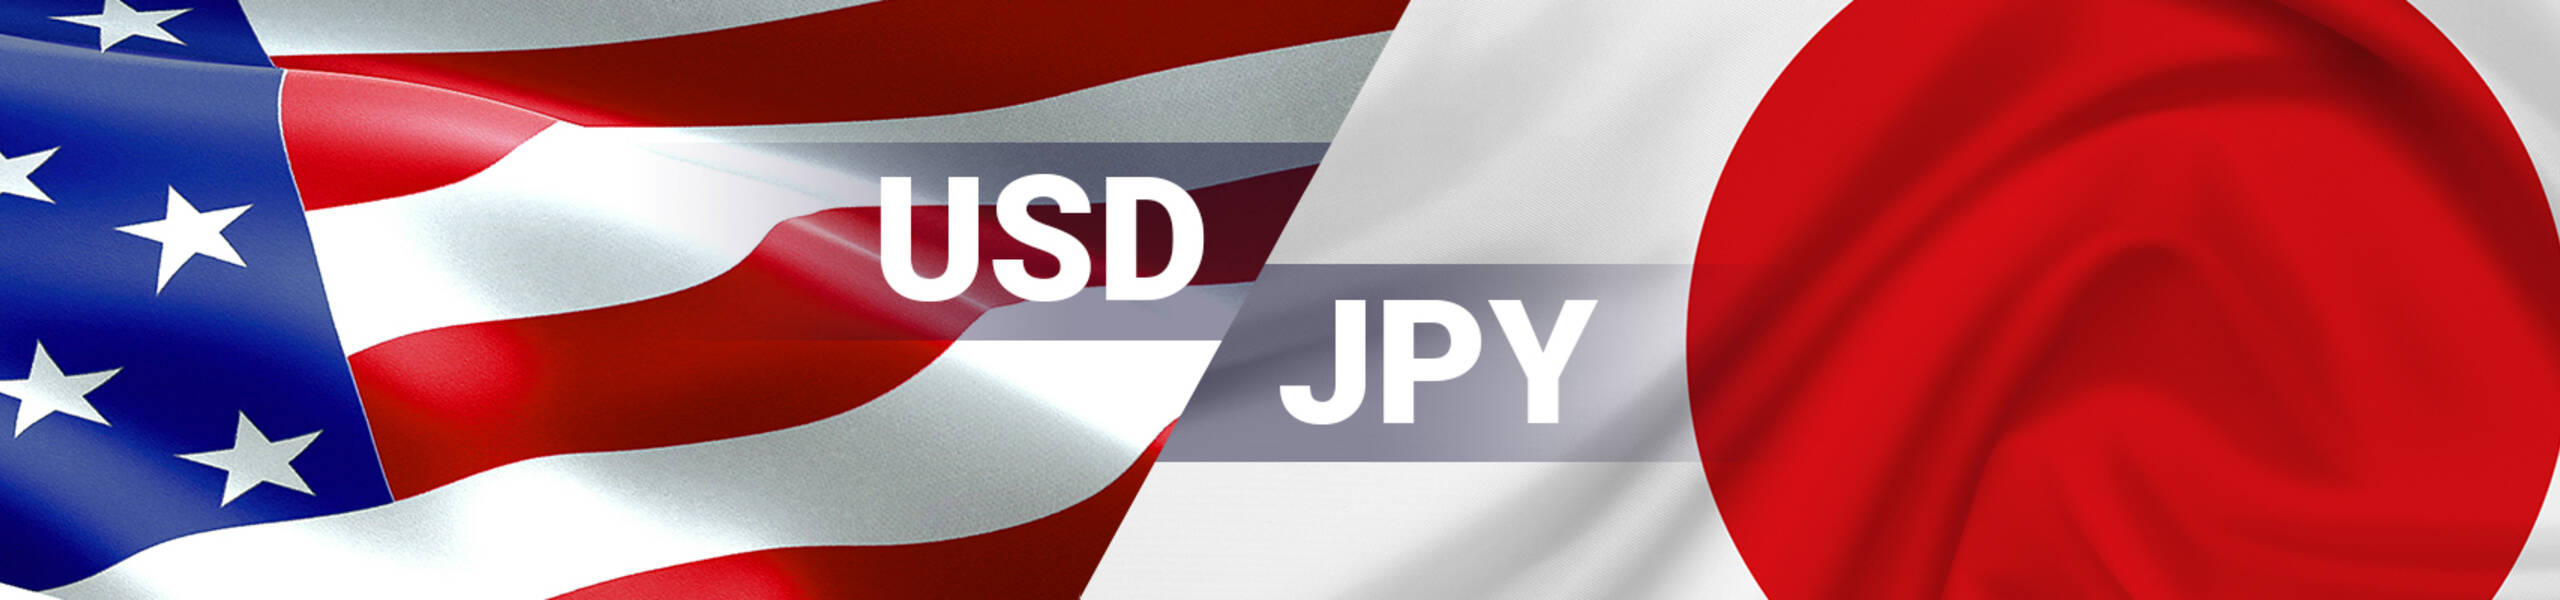 USD/JPY: bulls wait for the signal to attack